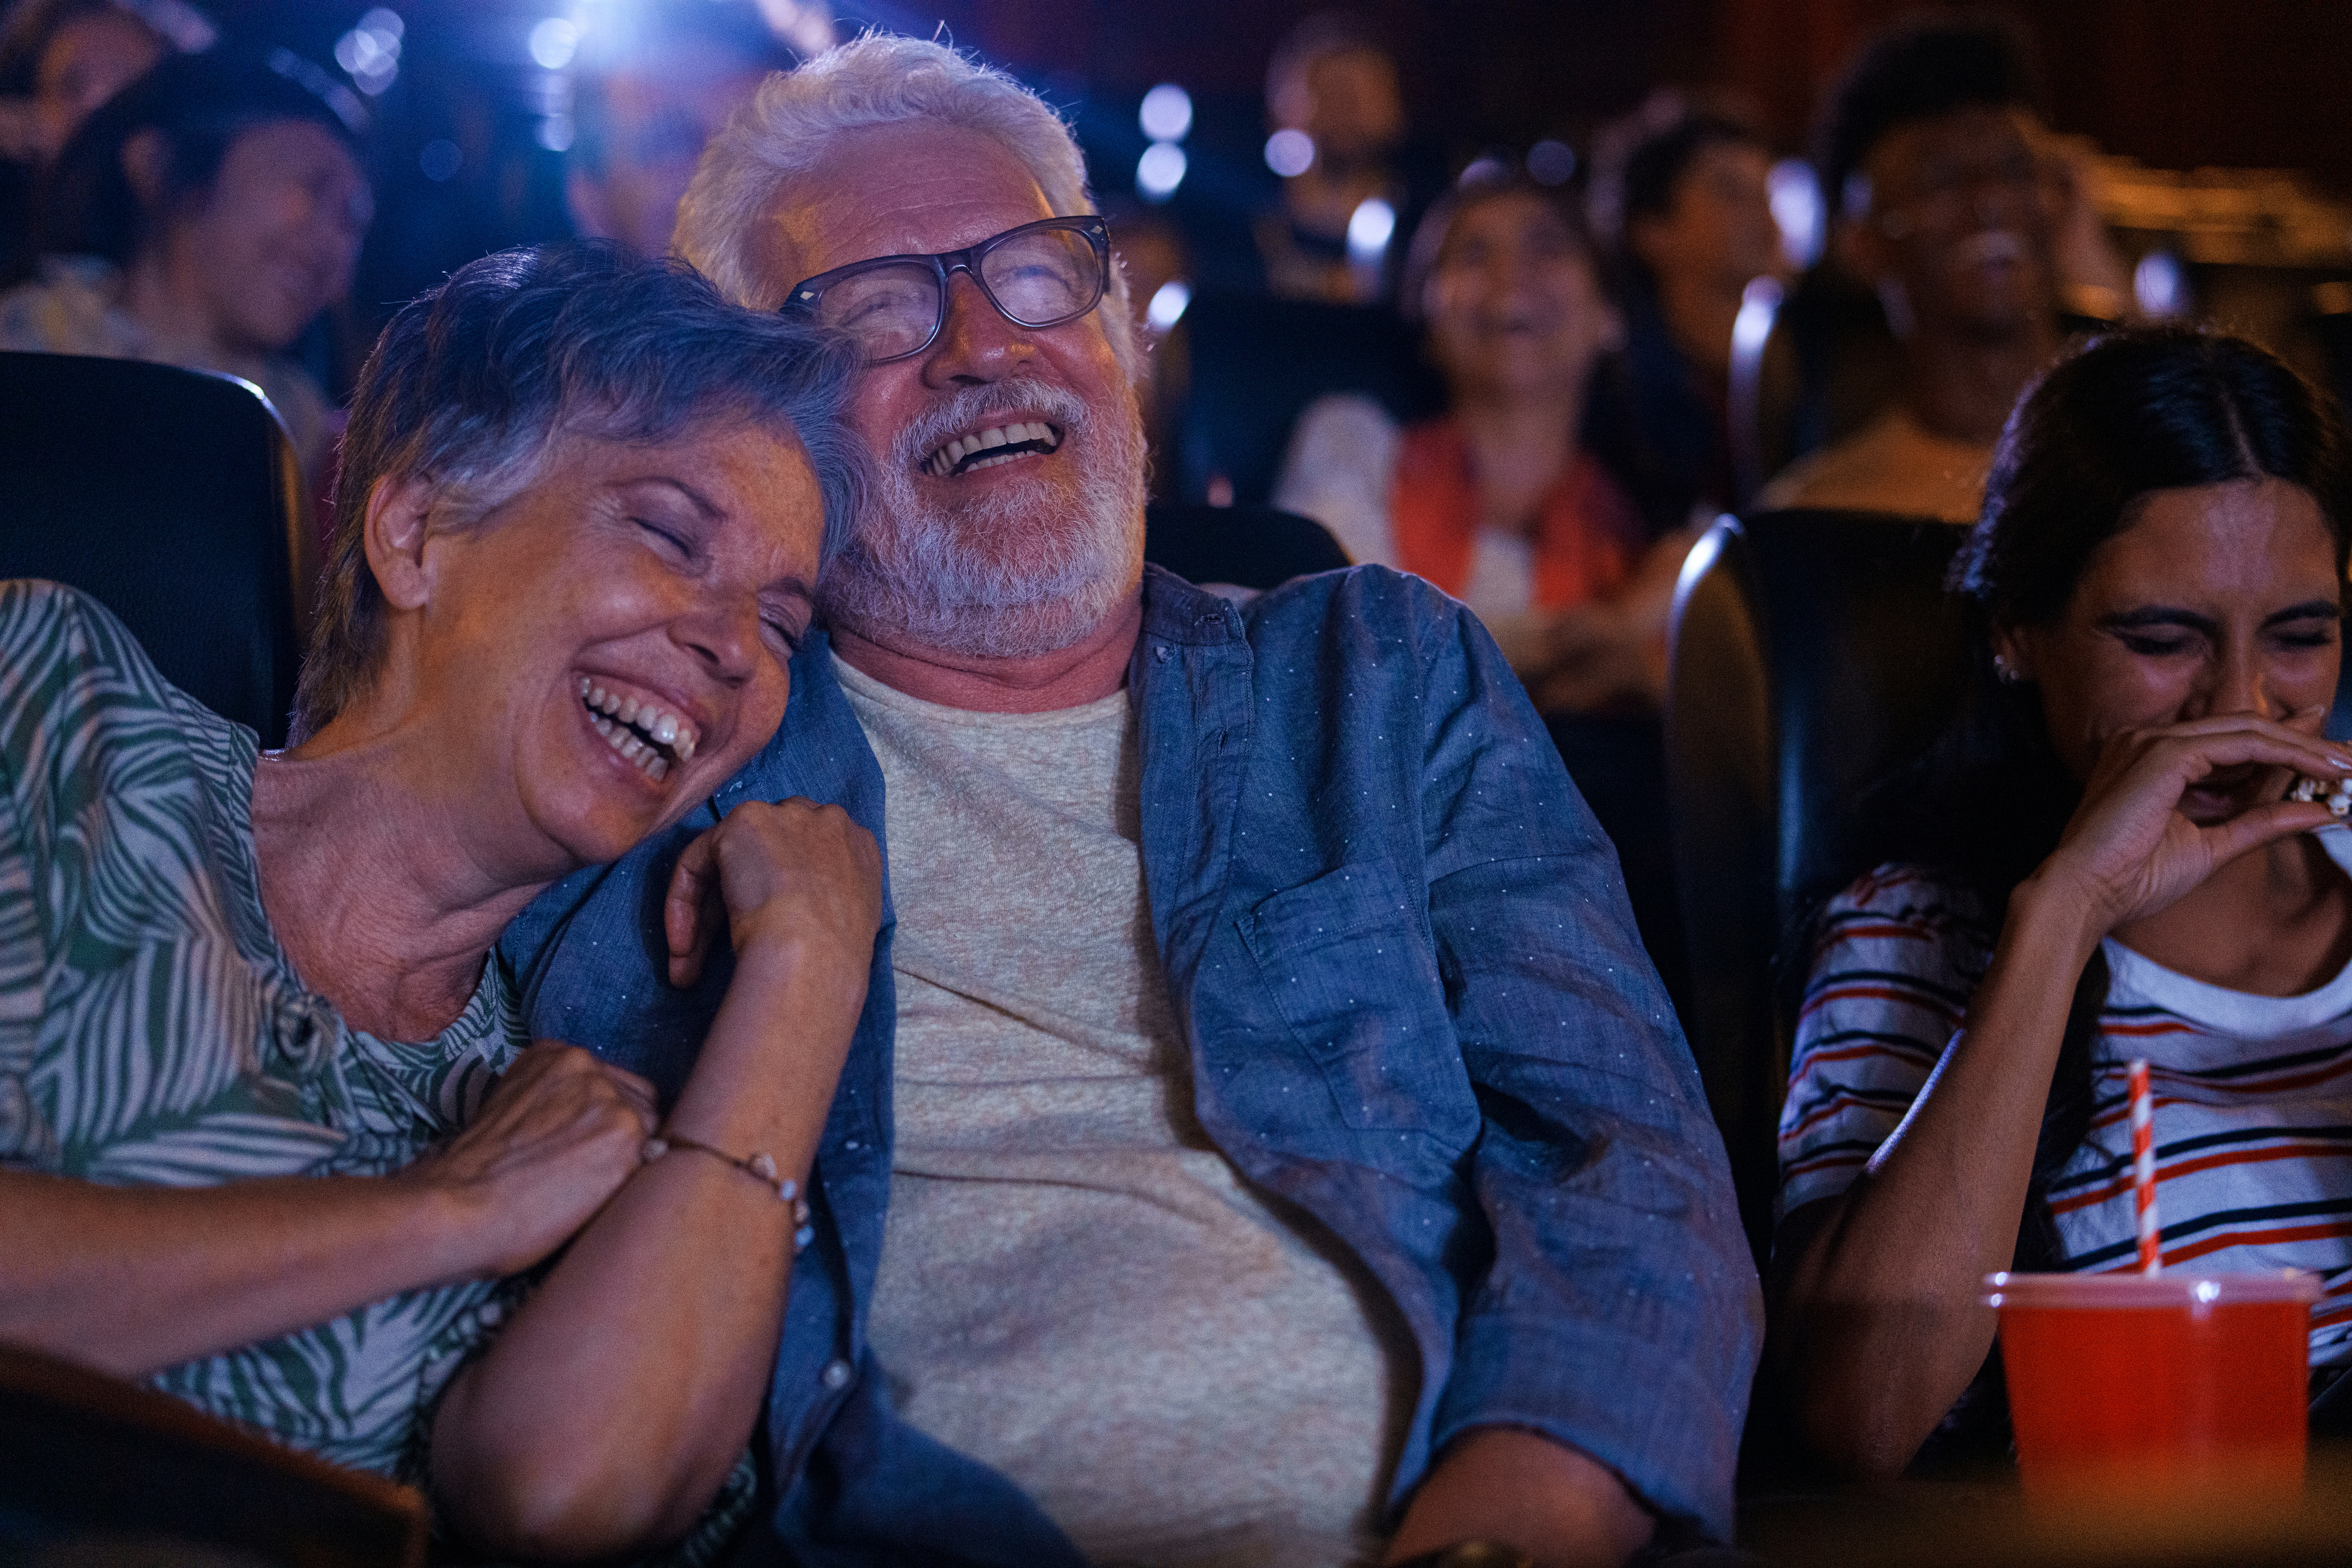 An elderly couple and a woman laugh while watching a movie in a theater, surrounded by other smiling people